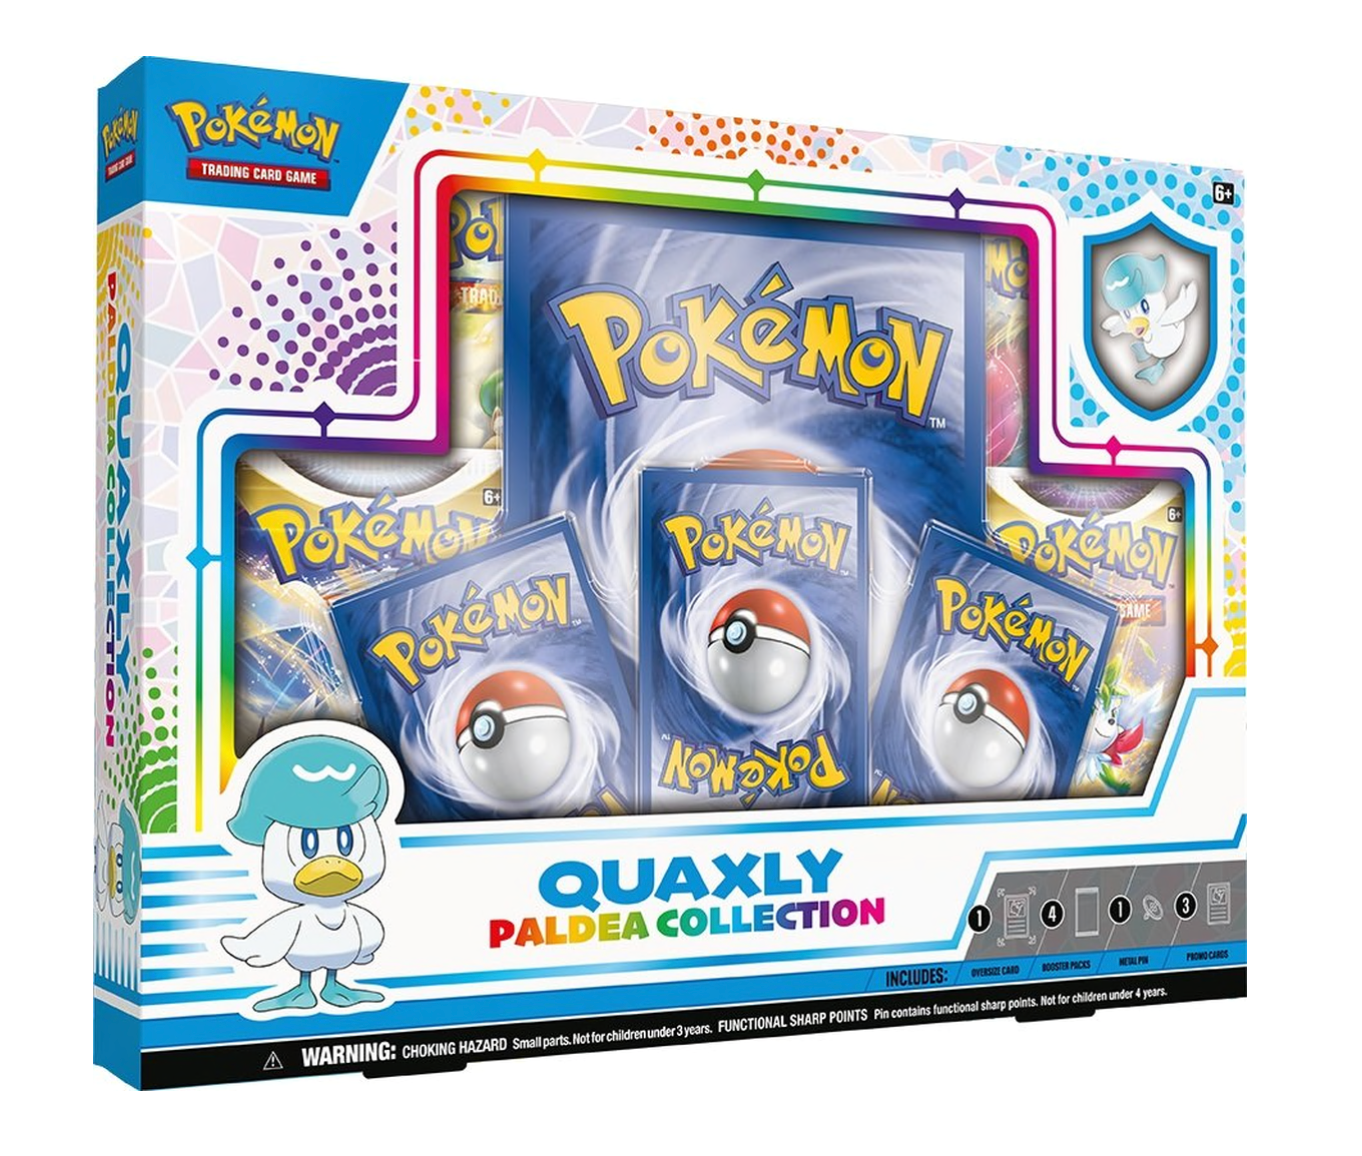 Pokémon - Quaxly Palled Collection